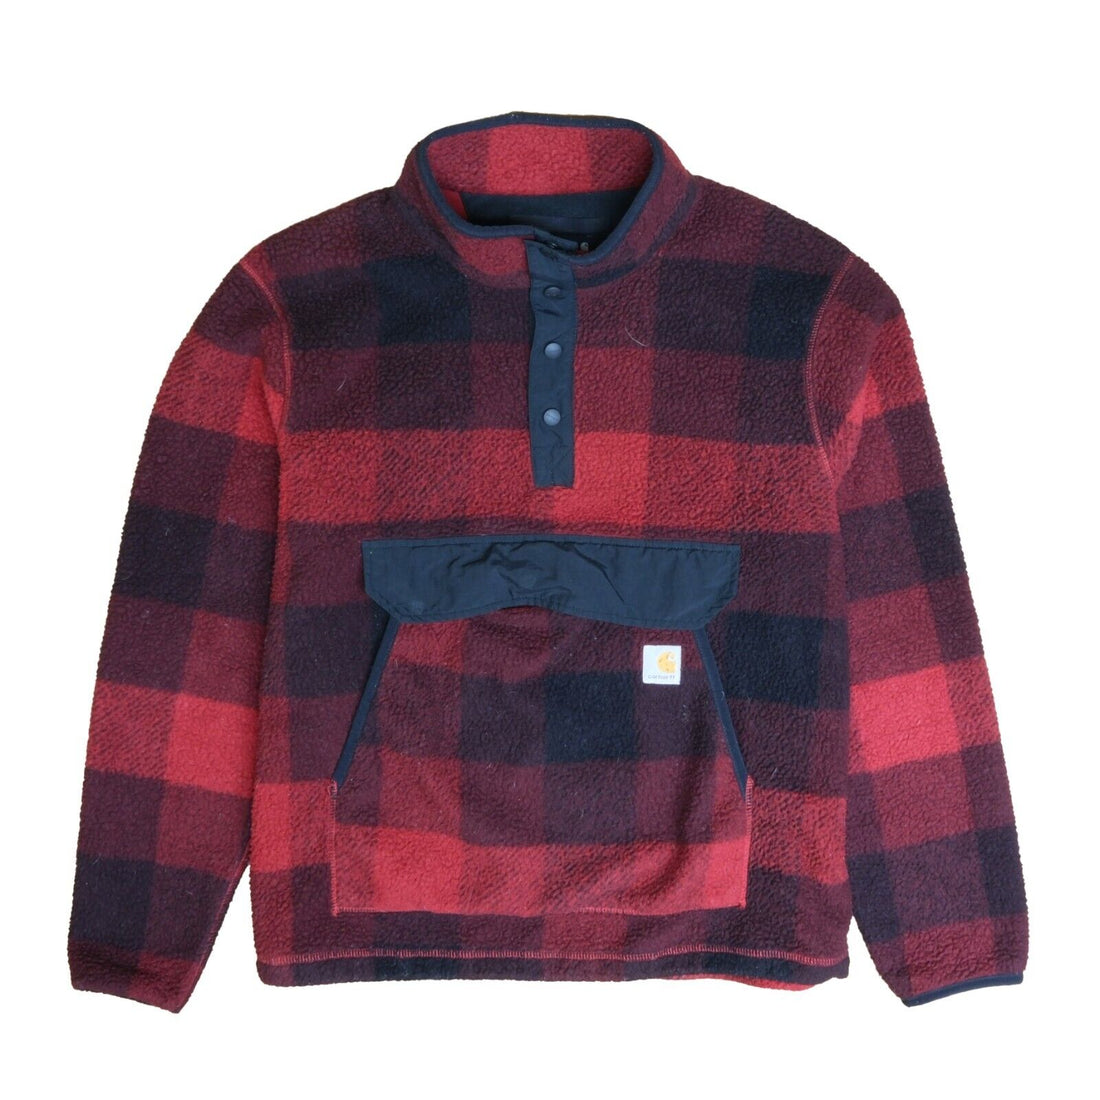 Carhartt Anorak Fleece Jacket Size Large Red Plaid Relaxed Fit